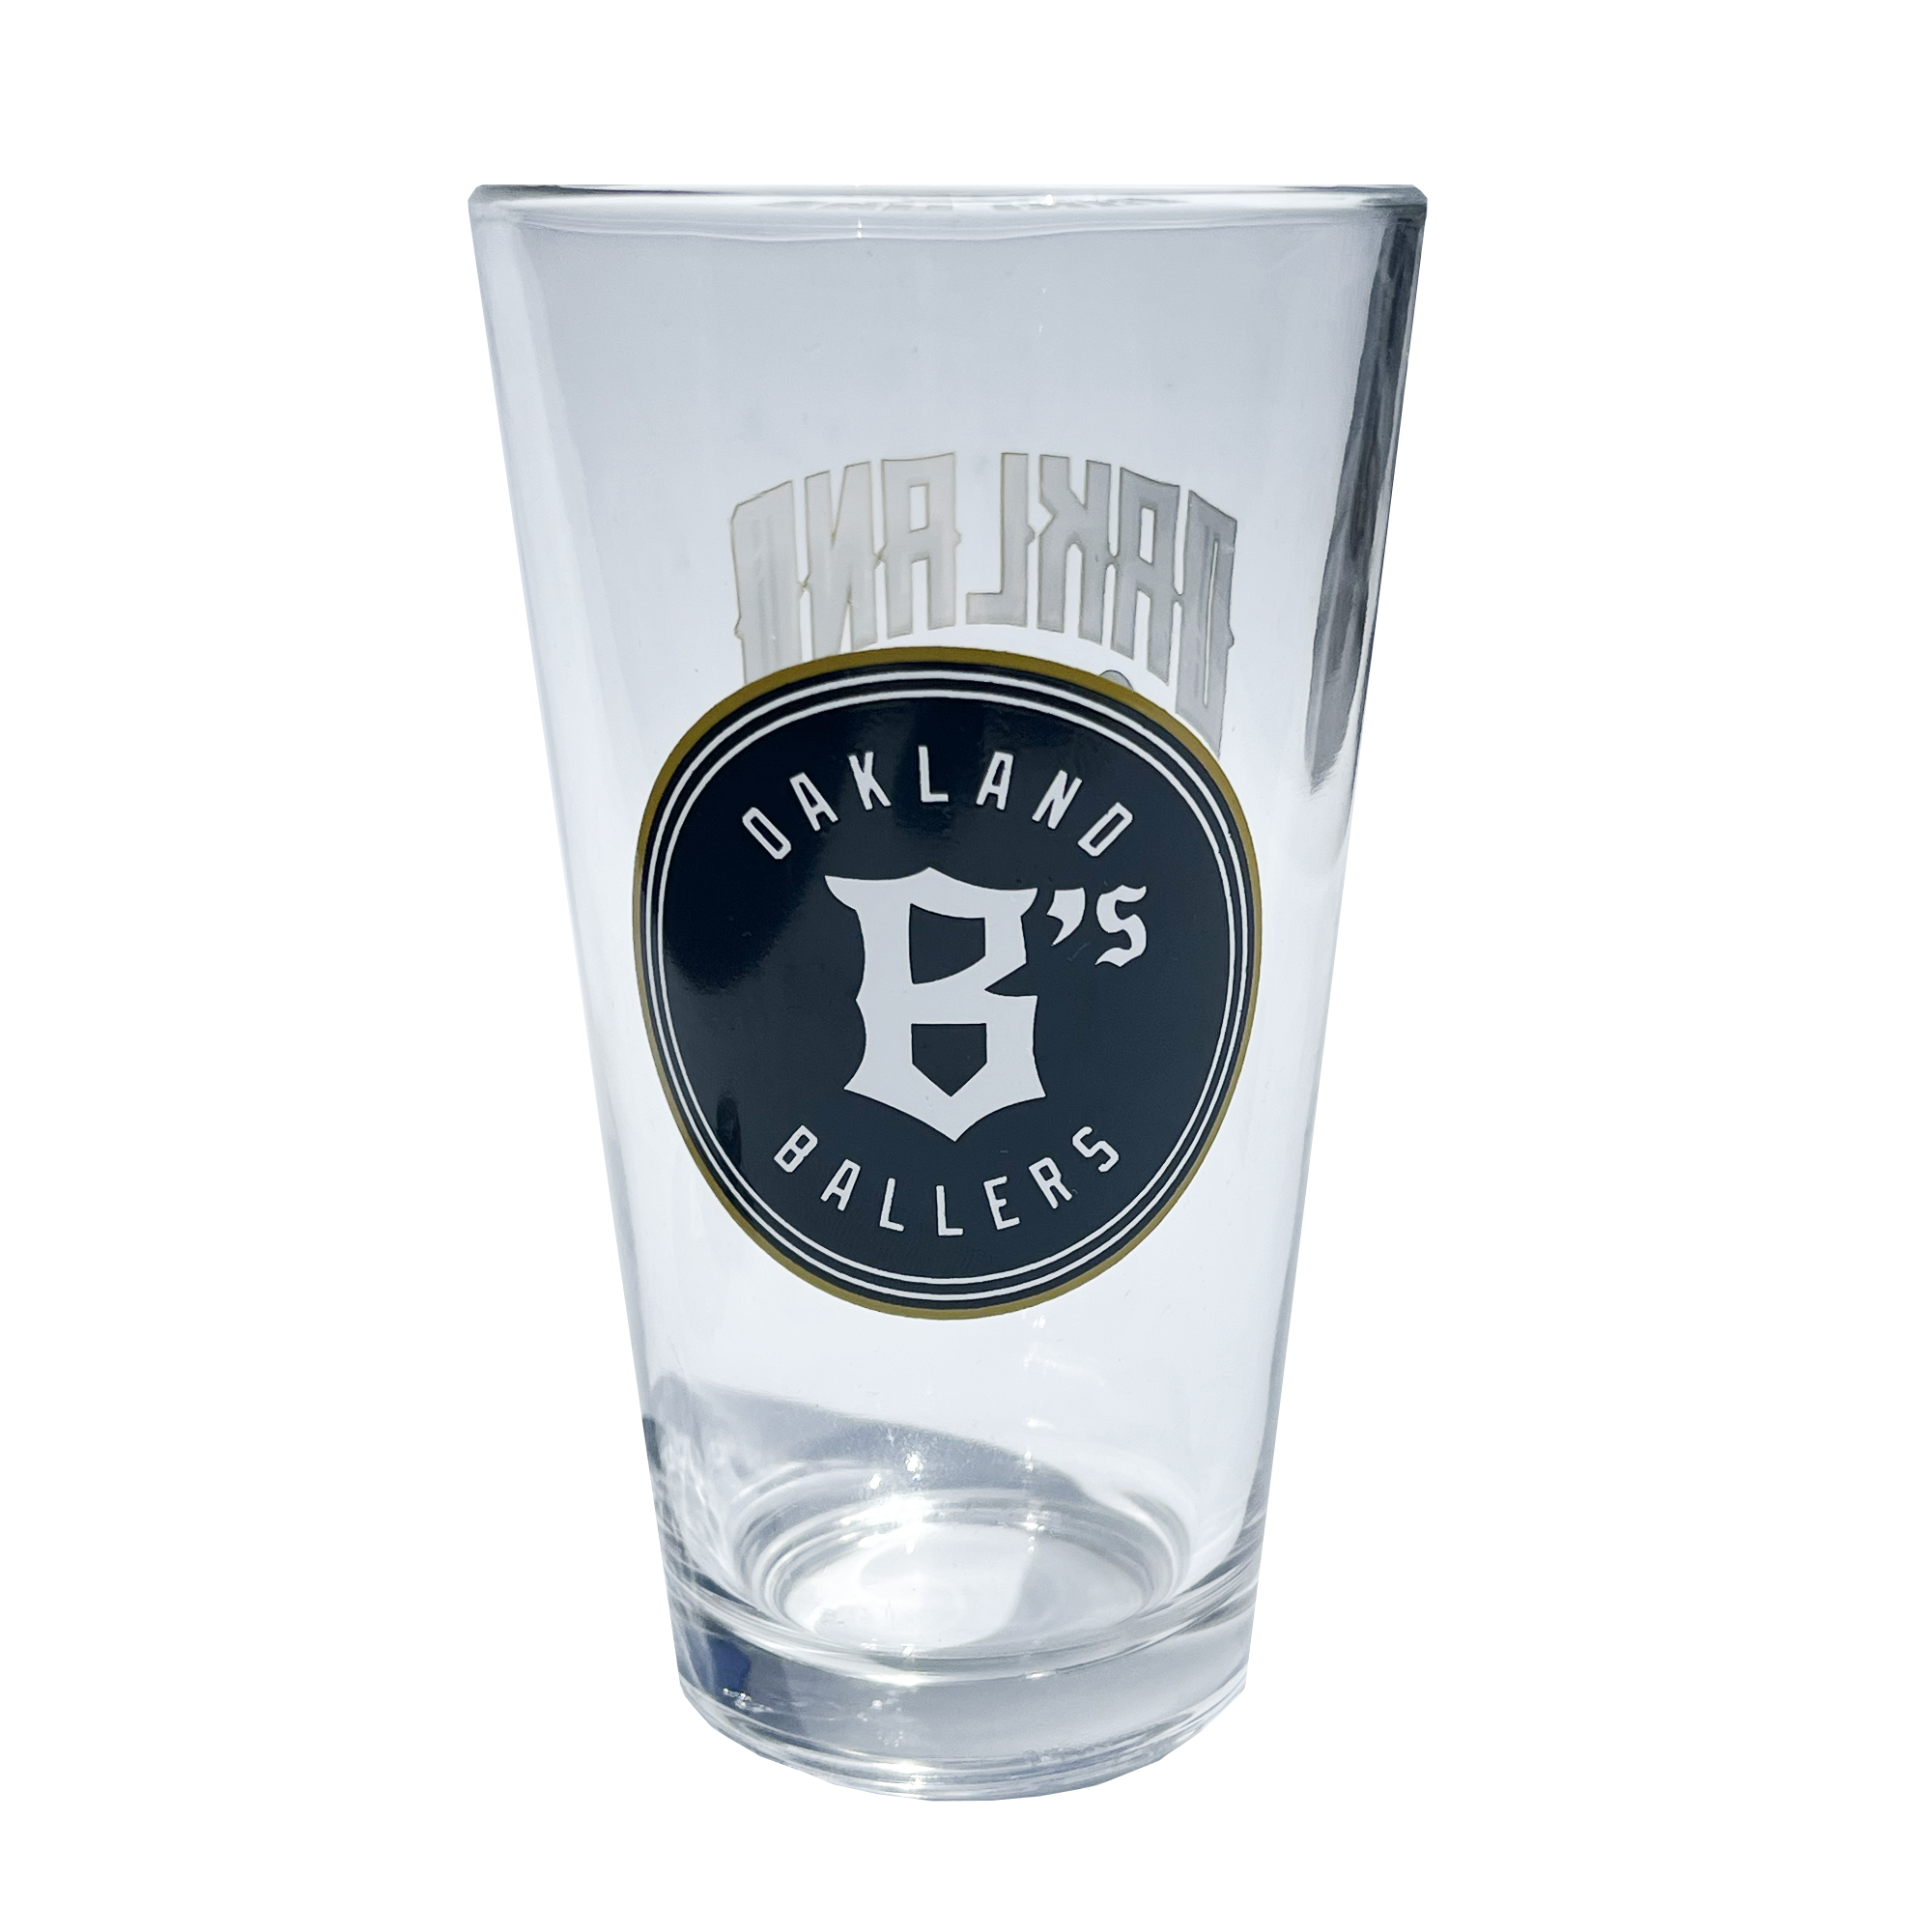 Angled image of pint glass with Oakland Ballers baseball logo in green and gold.